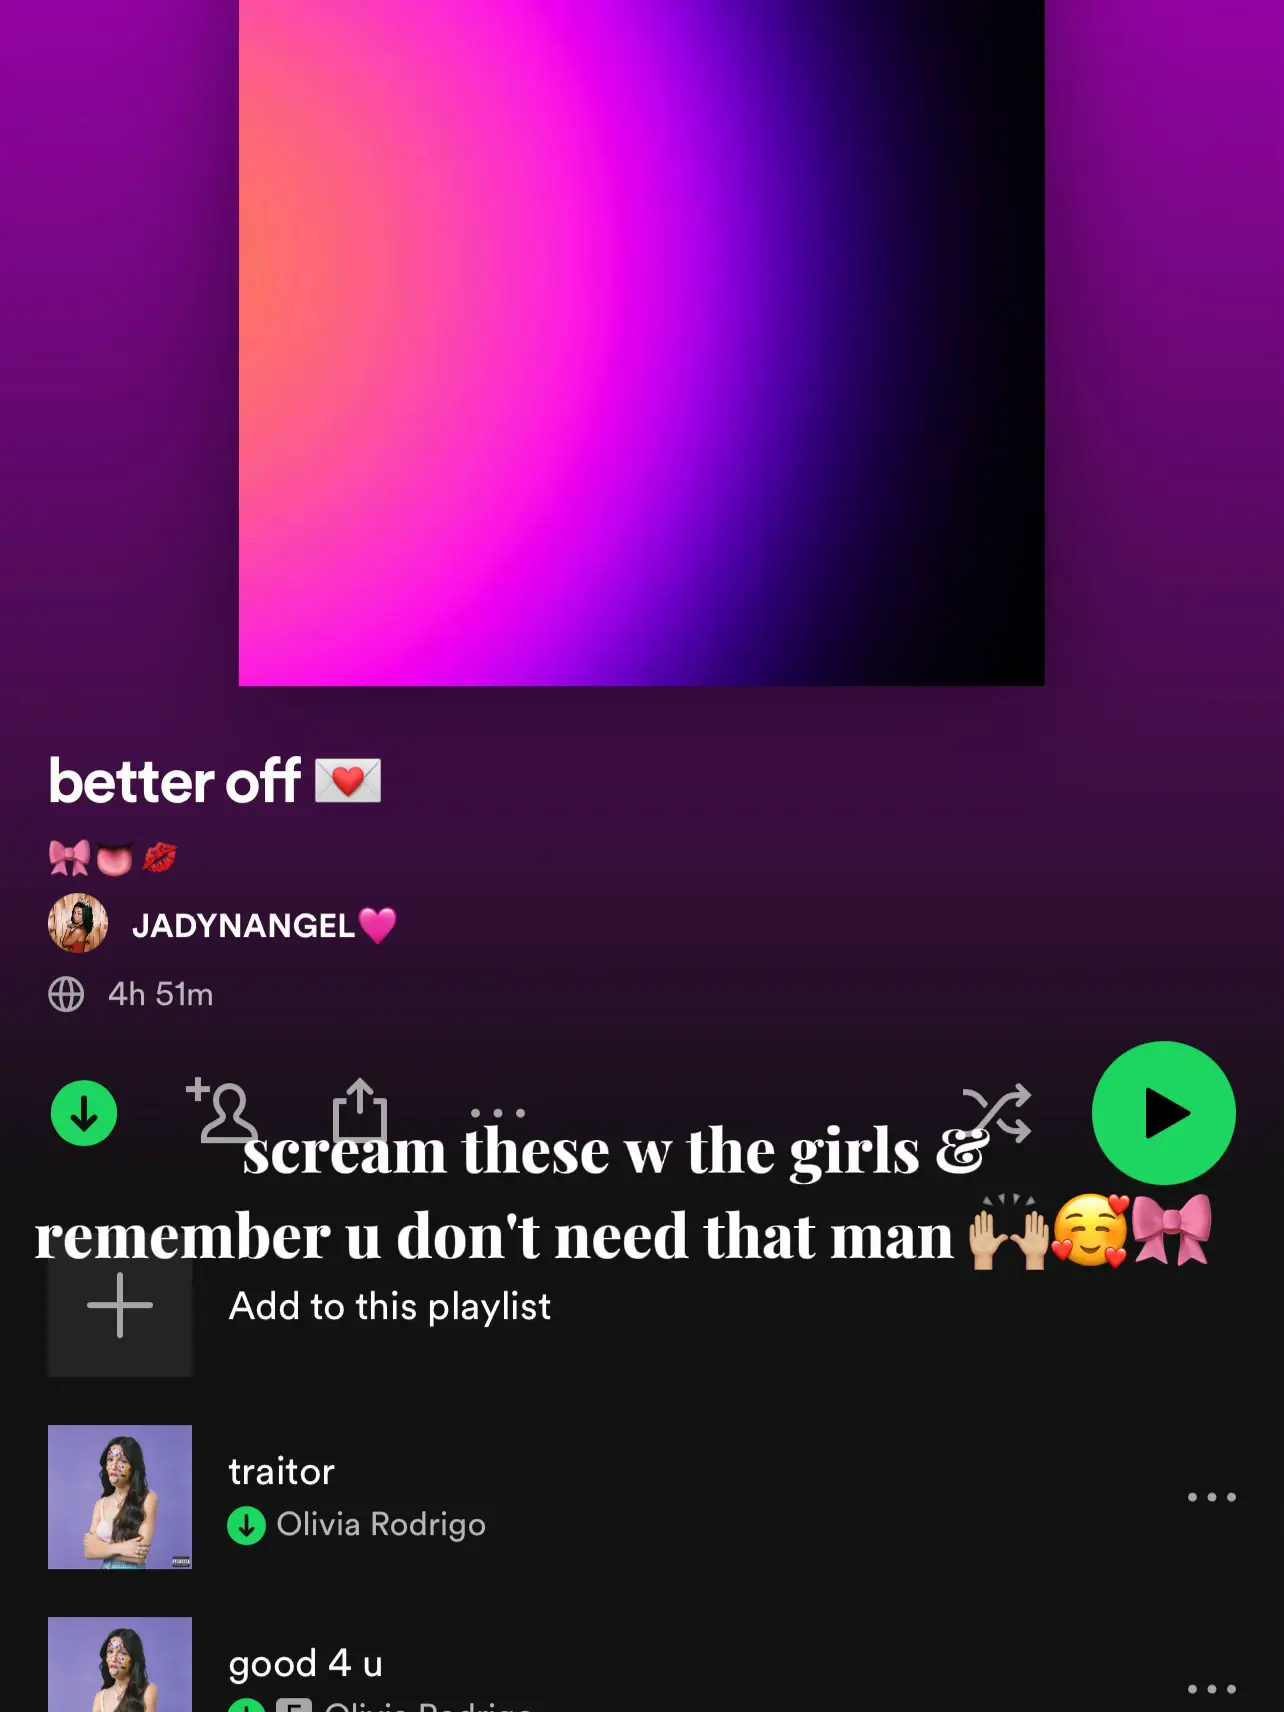  A playlist with a song by Olivia Rodrigo and a quote by Taylor Swift.